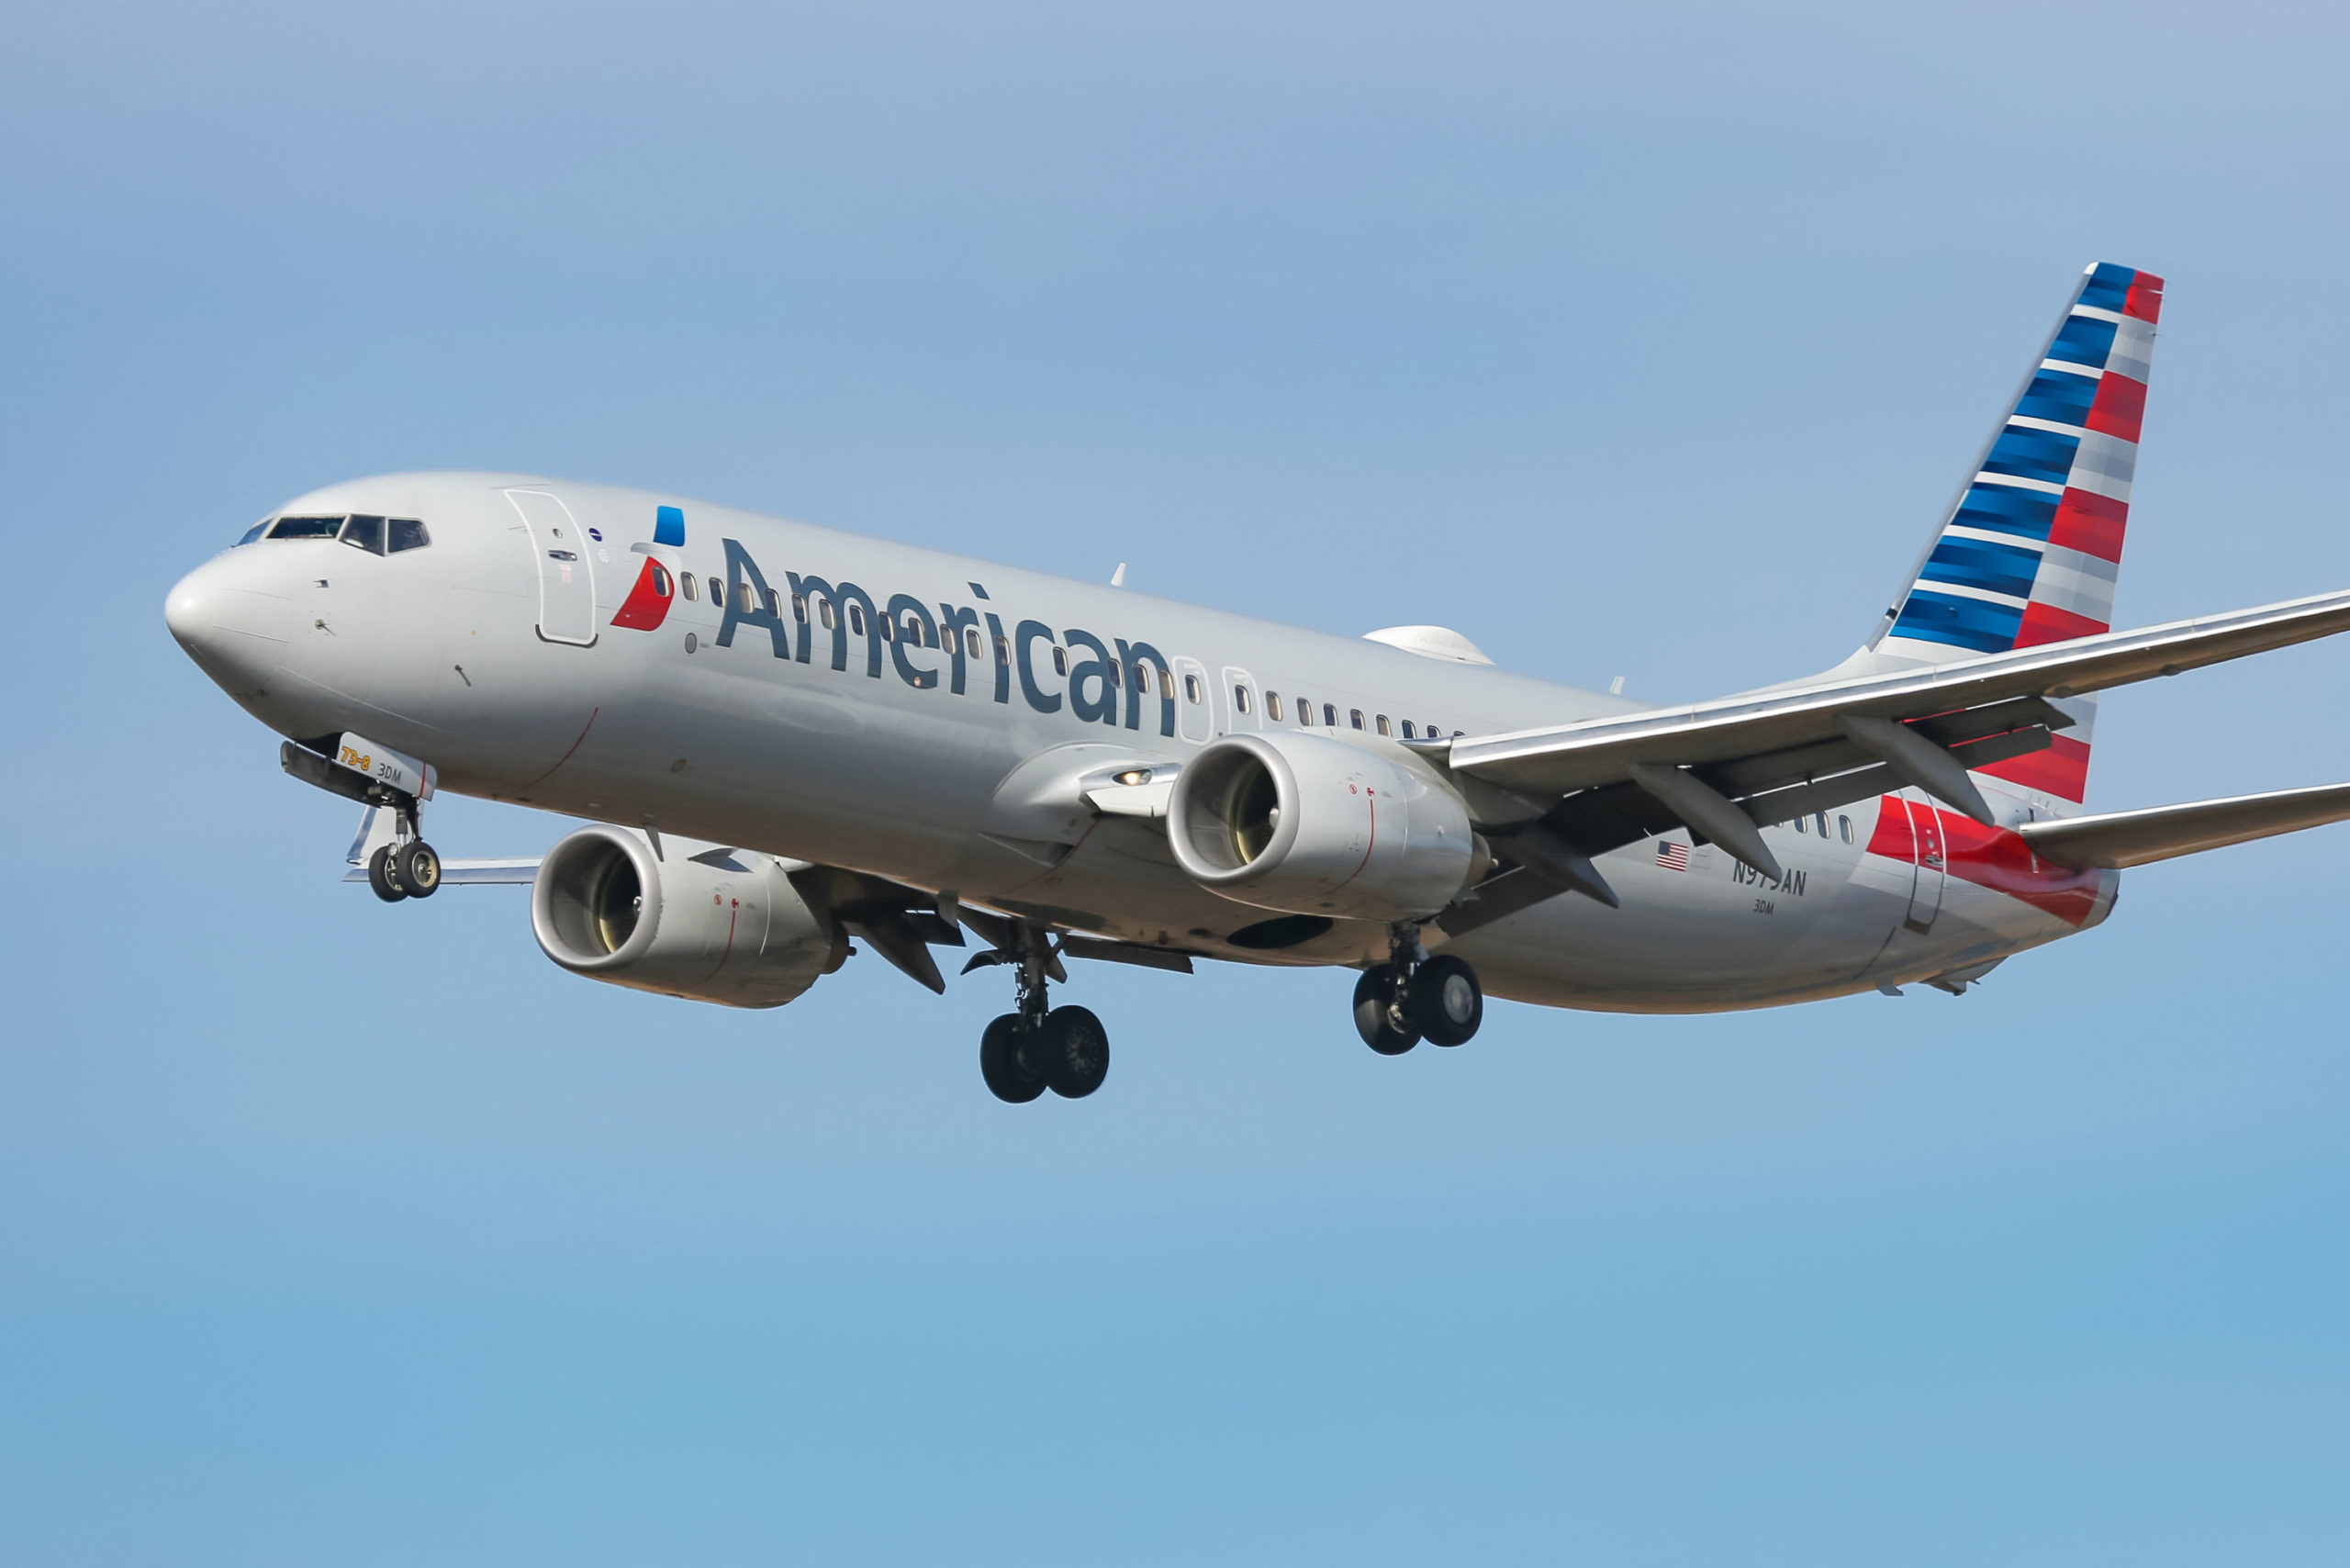 American Air to renew full flights on July 1